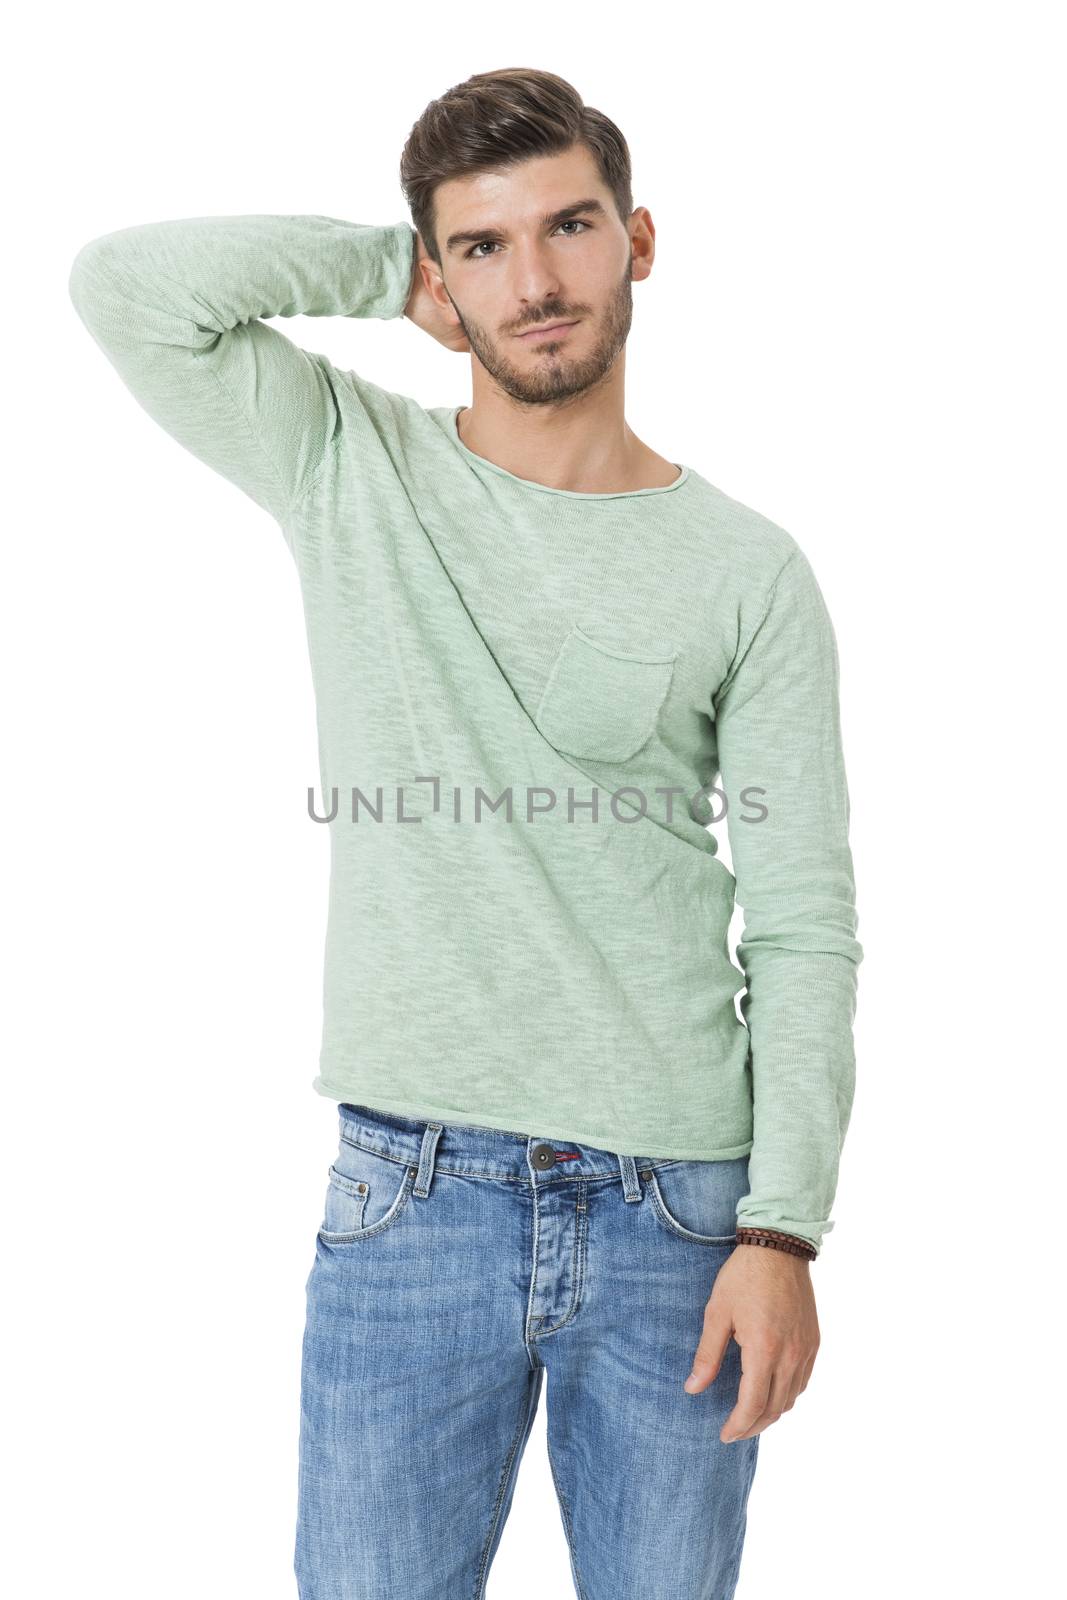 Puzzled handsome young man scratching his head with his hand as he looks at the camera with an uncertain perturbed expression, isolated on white